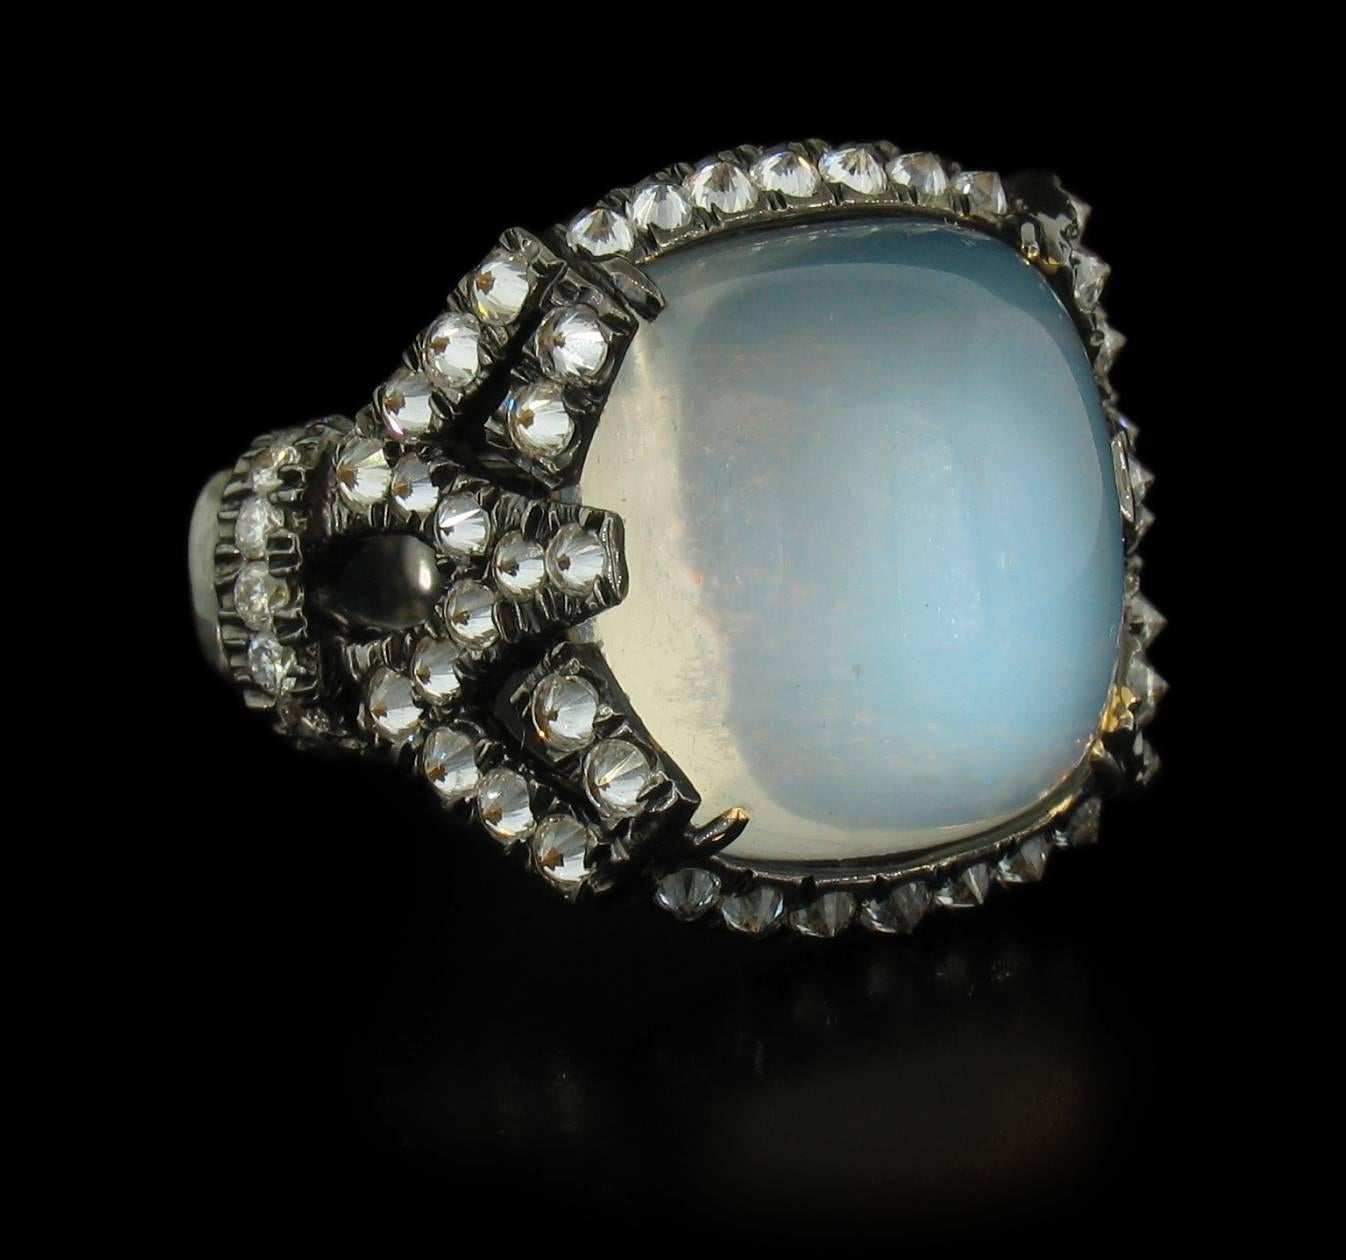 Designed by famed designer Arunashi, This hand made, extraordinary ring features a Silver Moonstone of the highest quality weighing 12.01 carats.  It is surrounded with 64 Diamonds weighing 1.17 carats, approximately F~G-VS2 in color and clarity.